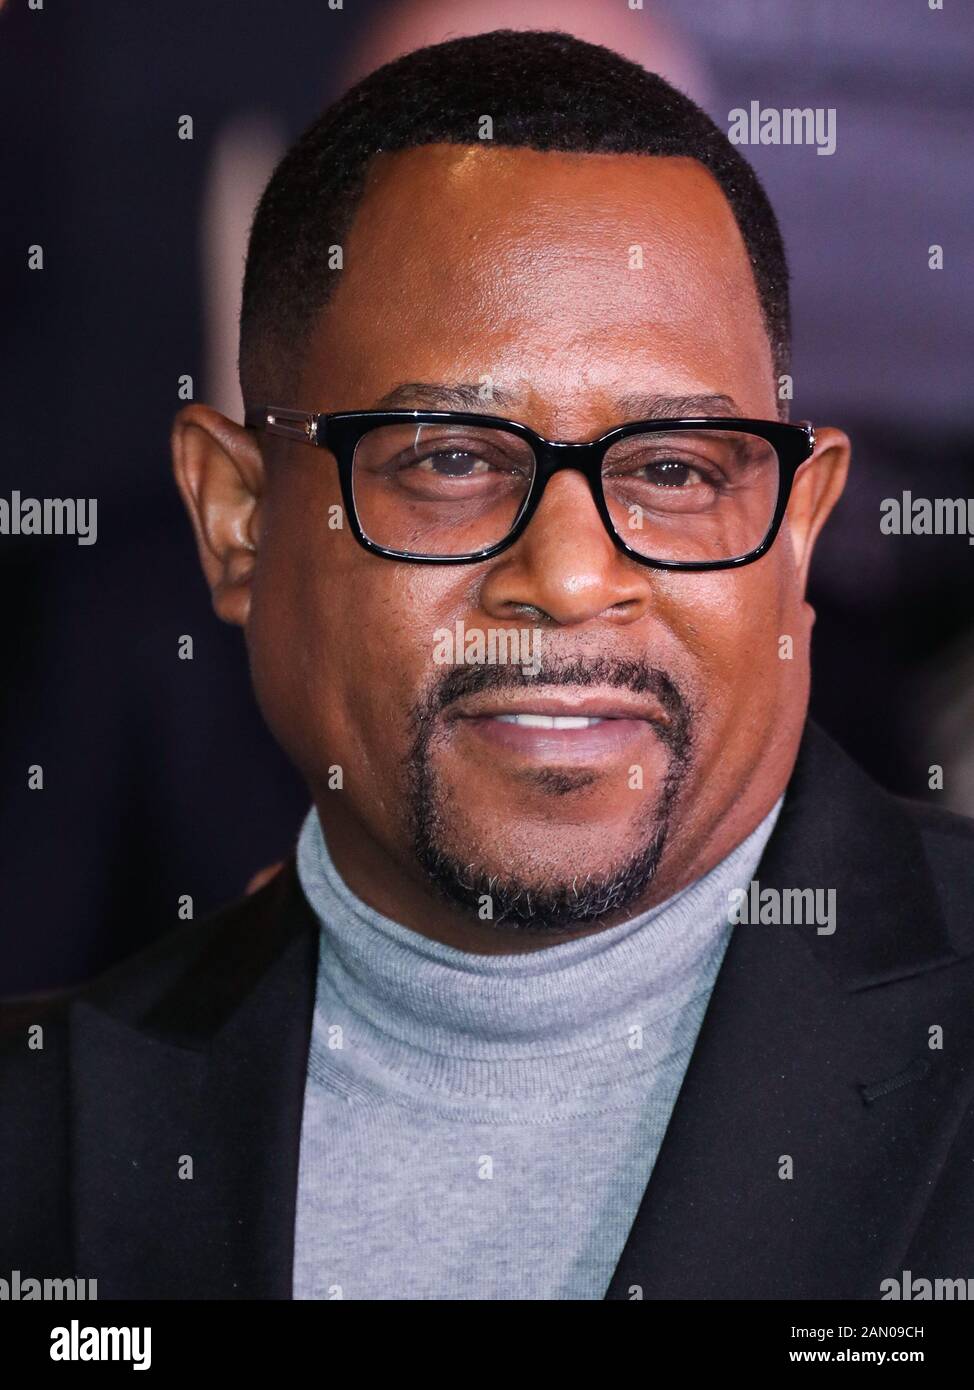 HOLLYWOOD, LOS ANGELES, CALIFORNIA, USA - JANUARY 14: Actor Martin Lawrence arrives at the Los Angeles Premiere Of Columbia Pictures' 'Bad Boys For Life' held at the TCL Chinese Theatre IMAX on January 14, 2020 in Hollywood, Los Angeles, California, United States. (Photo by Xavier Collin/Image Press Agency) Stock Photo